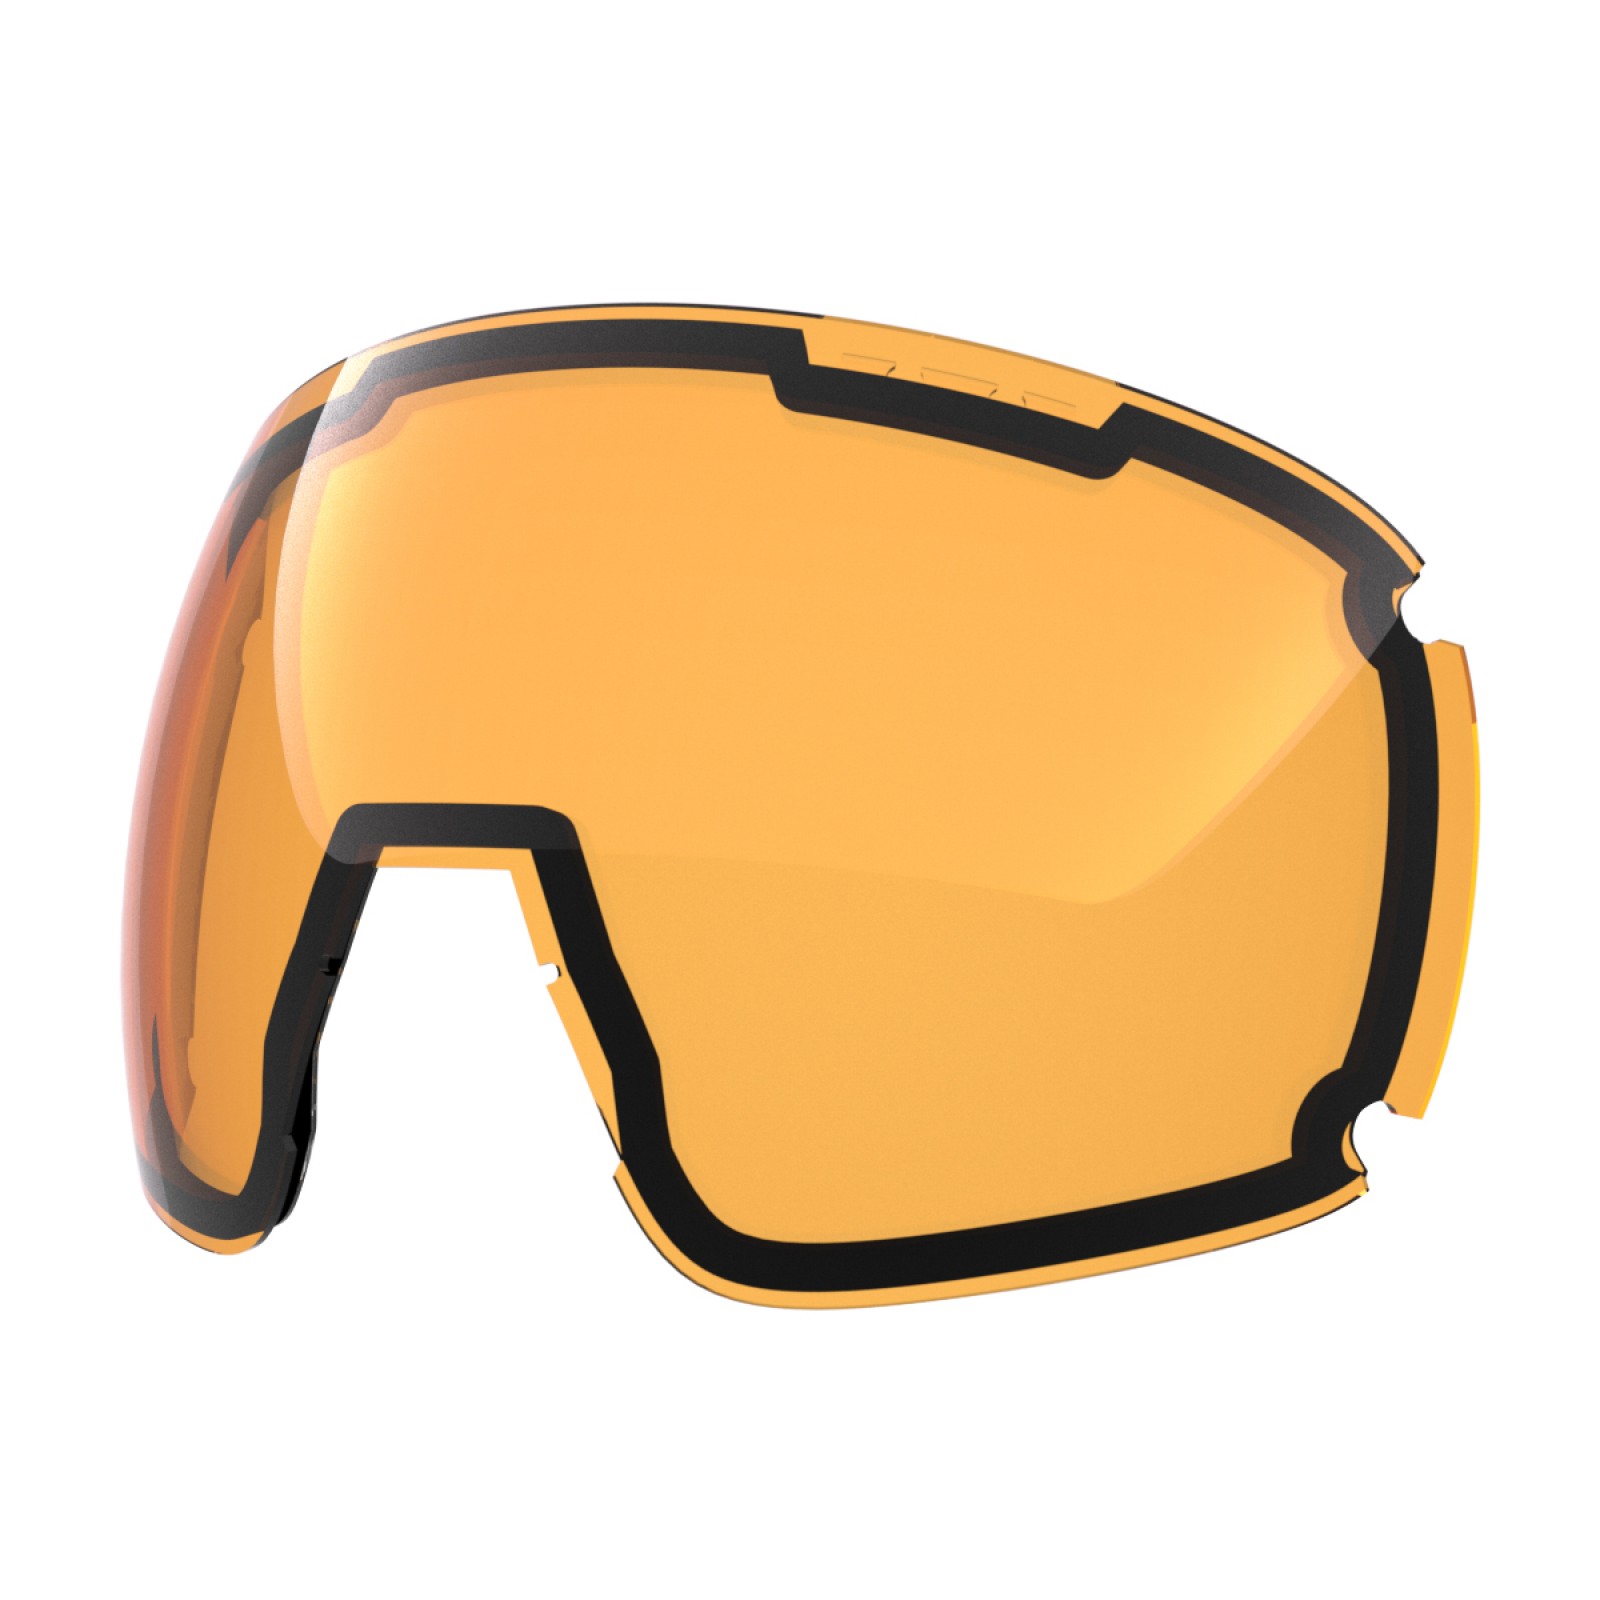 PERSIMMON LENS FOR EARTH SNOW GOGGLE